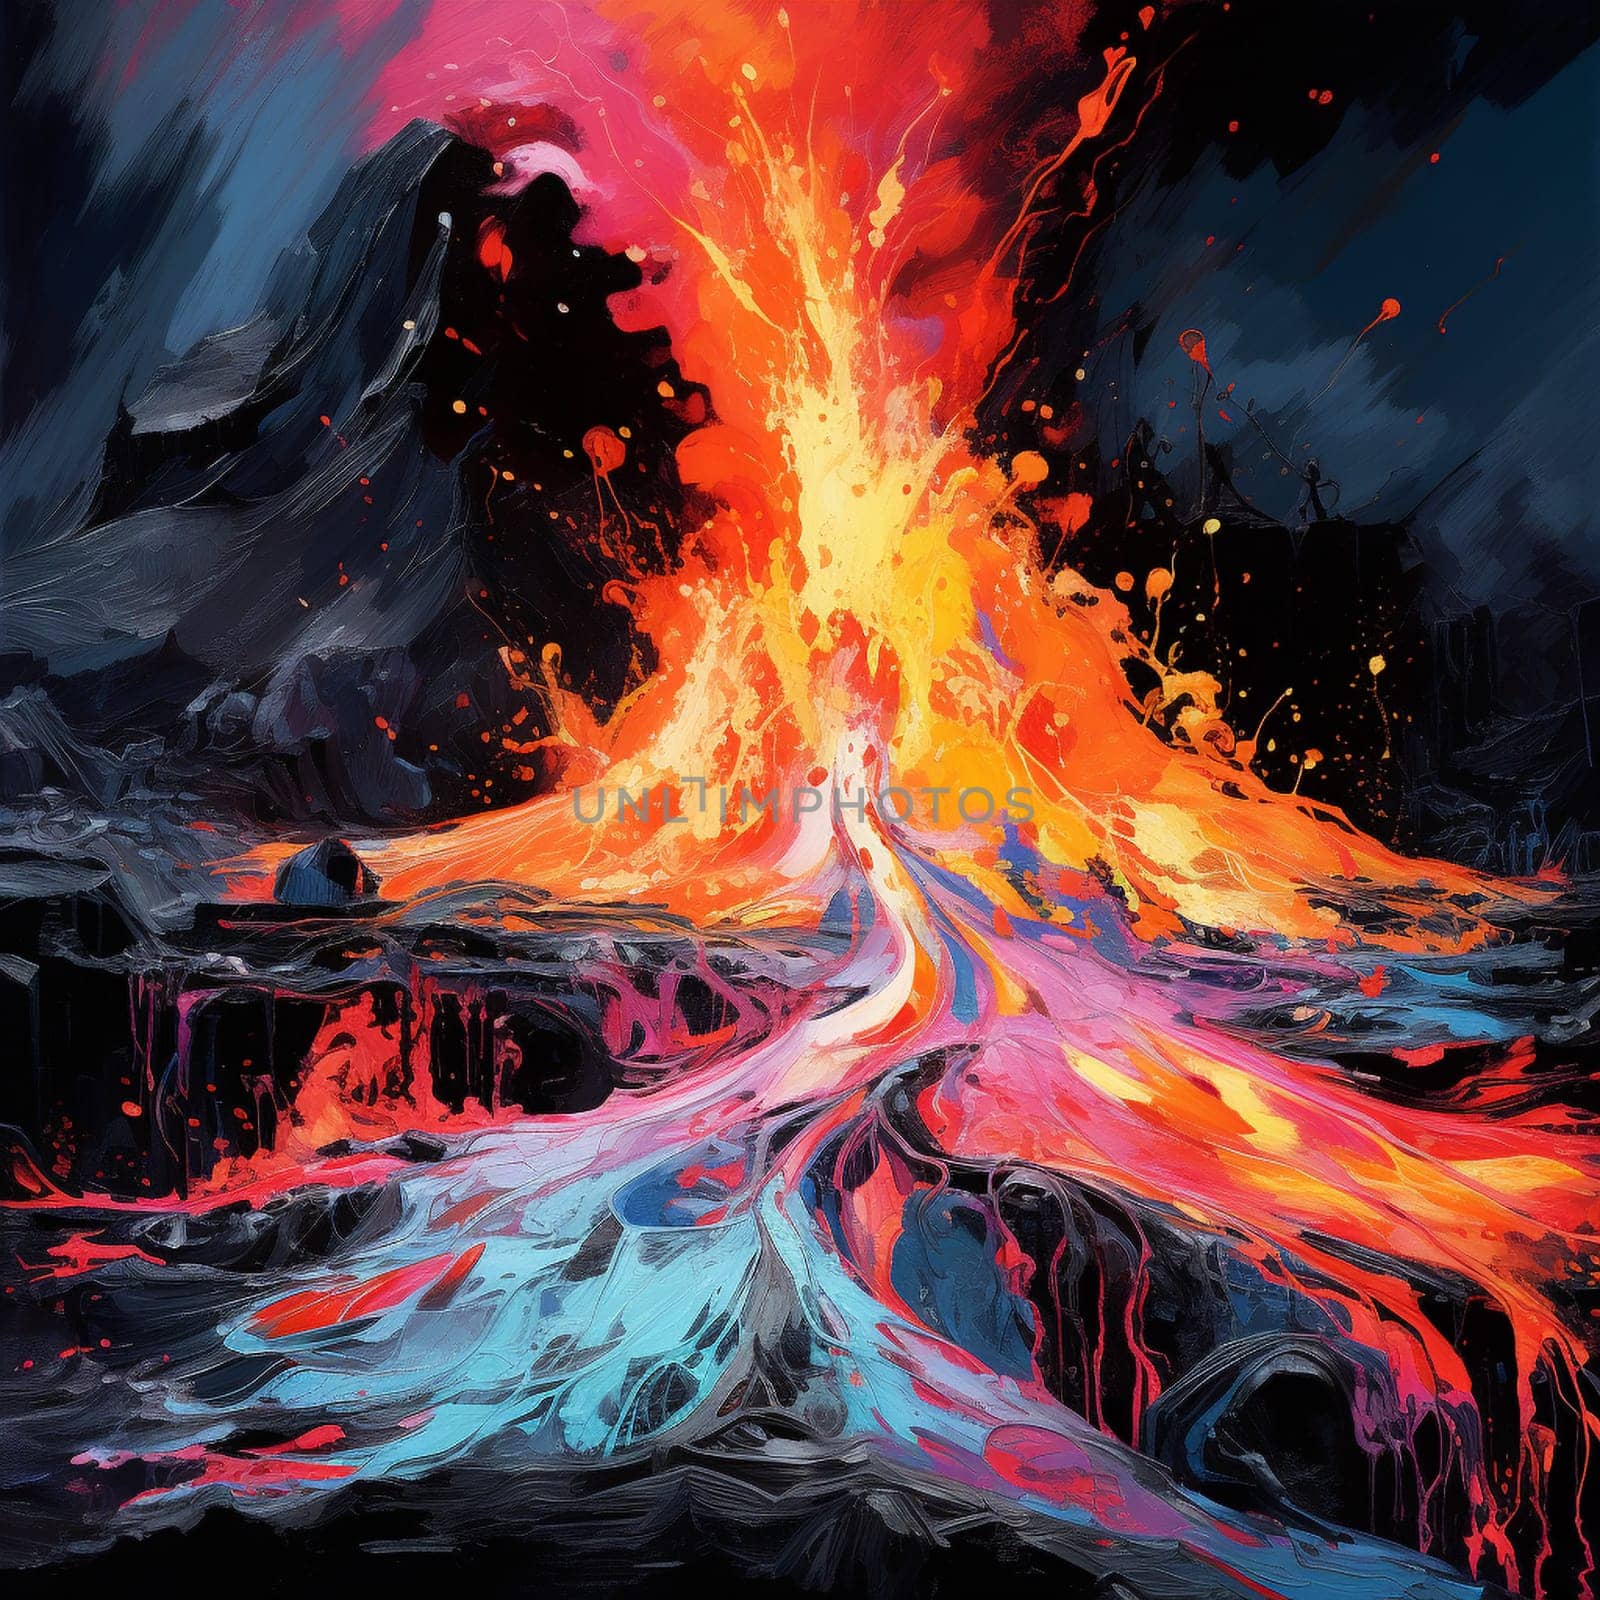 Experience the mesmerizing beauty and raw power of nature's fiery embrace in this surreal and abstract image of a volcanic eruption. Vibrant, swirling colors mingle with cascading lava streams, creating a captivating portrayal that evokes a sense of both awe and danger. The art style is reminiscent of Impressionism, with bold brushstrokes and a dreamlike quality that adds to the visual impact. There are no identifiable landmarks or trademarks, allowing the focus to solely remain on the stunning portrayal of this unique volcanic phenomenon.